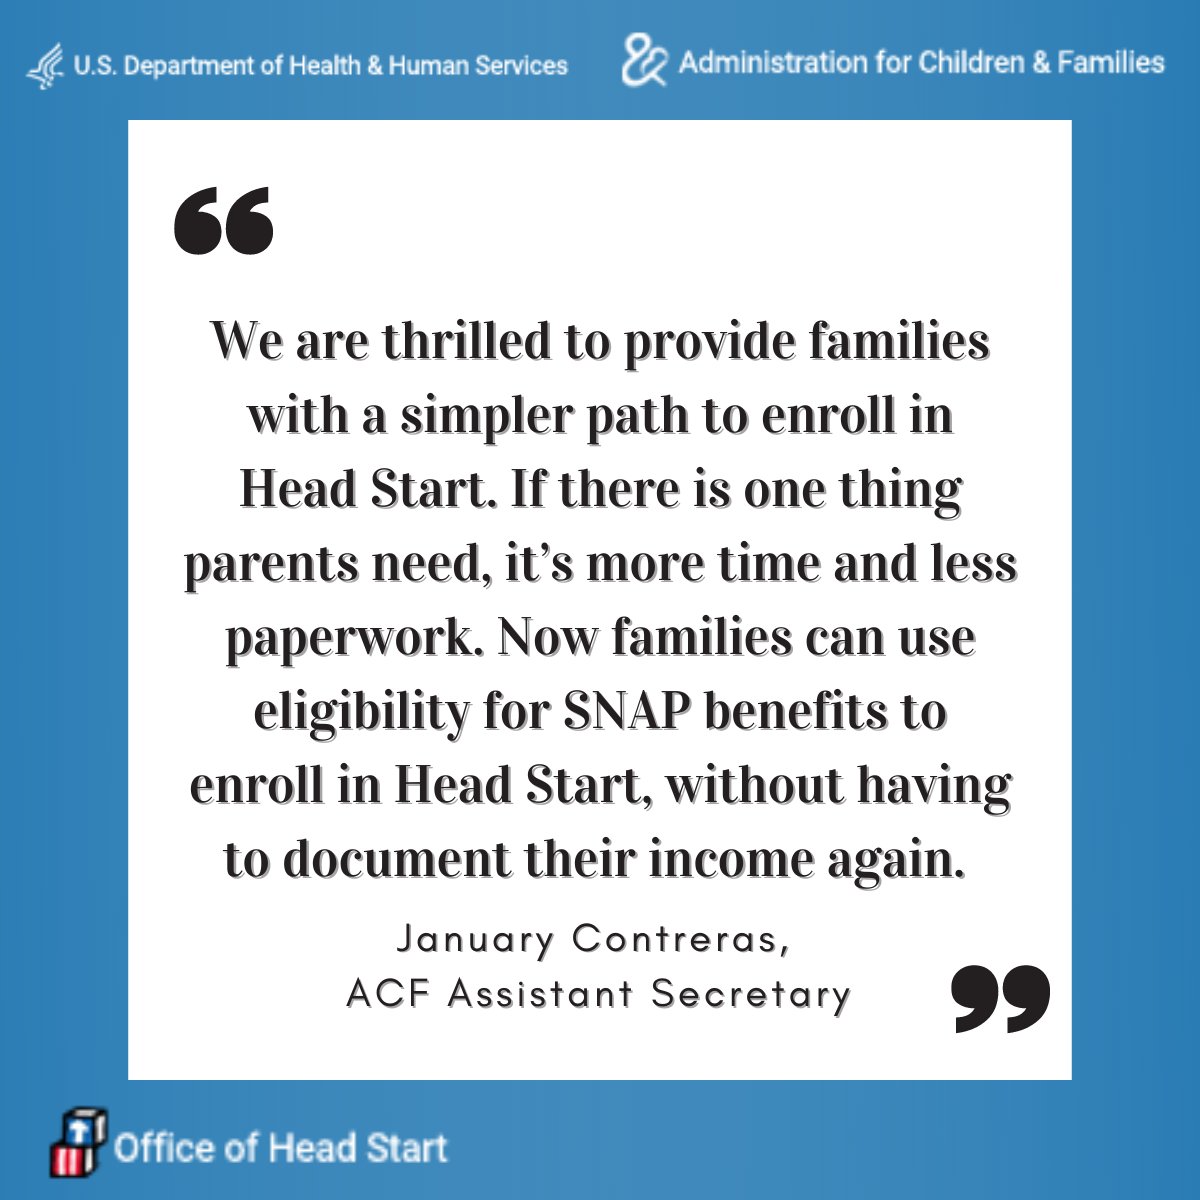 Head Start Services  The Administration for Children and Families